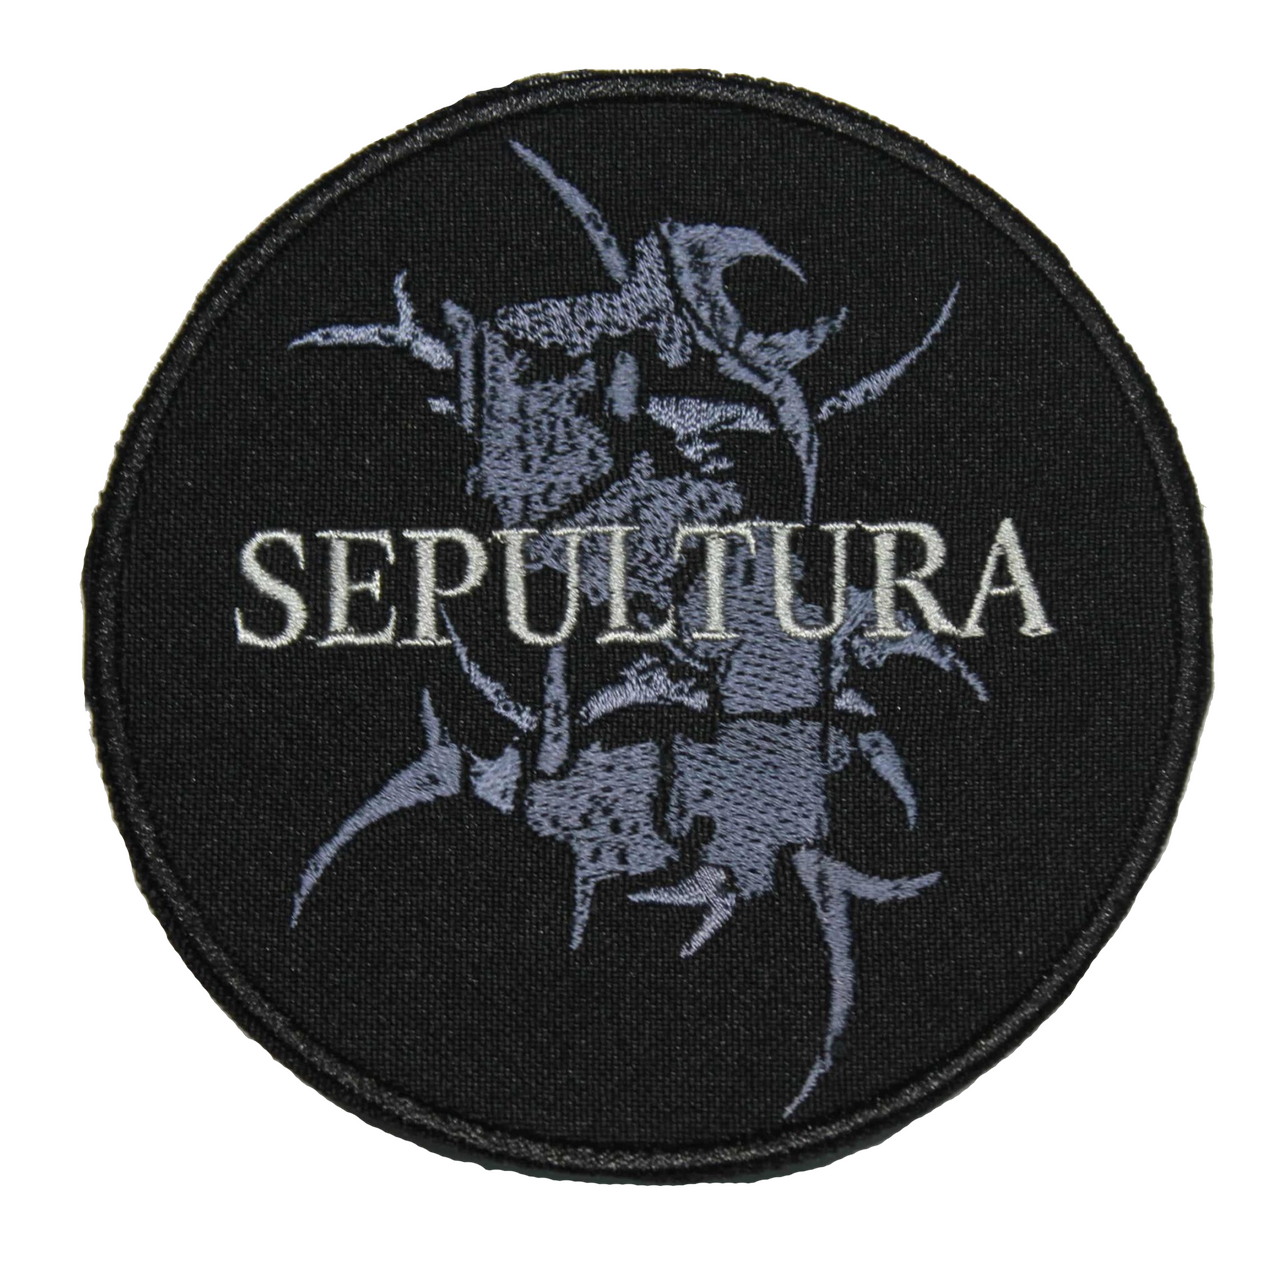 Sepultura Embroidered Patch